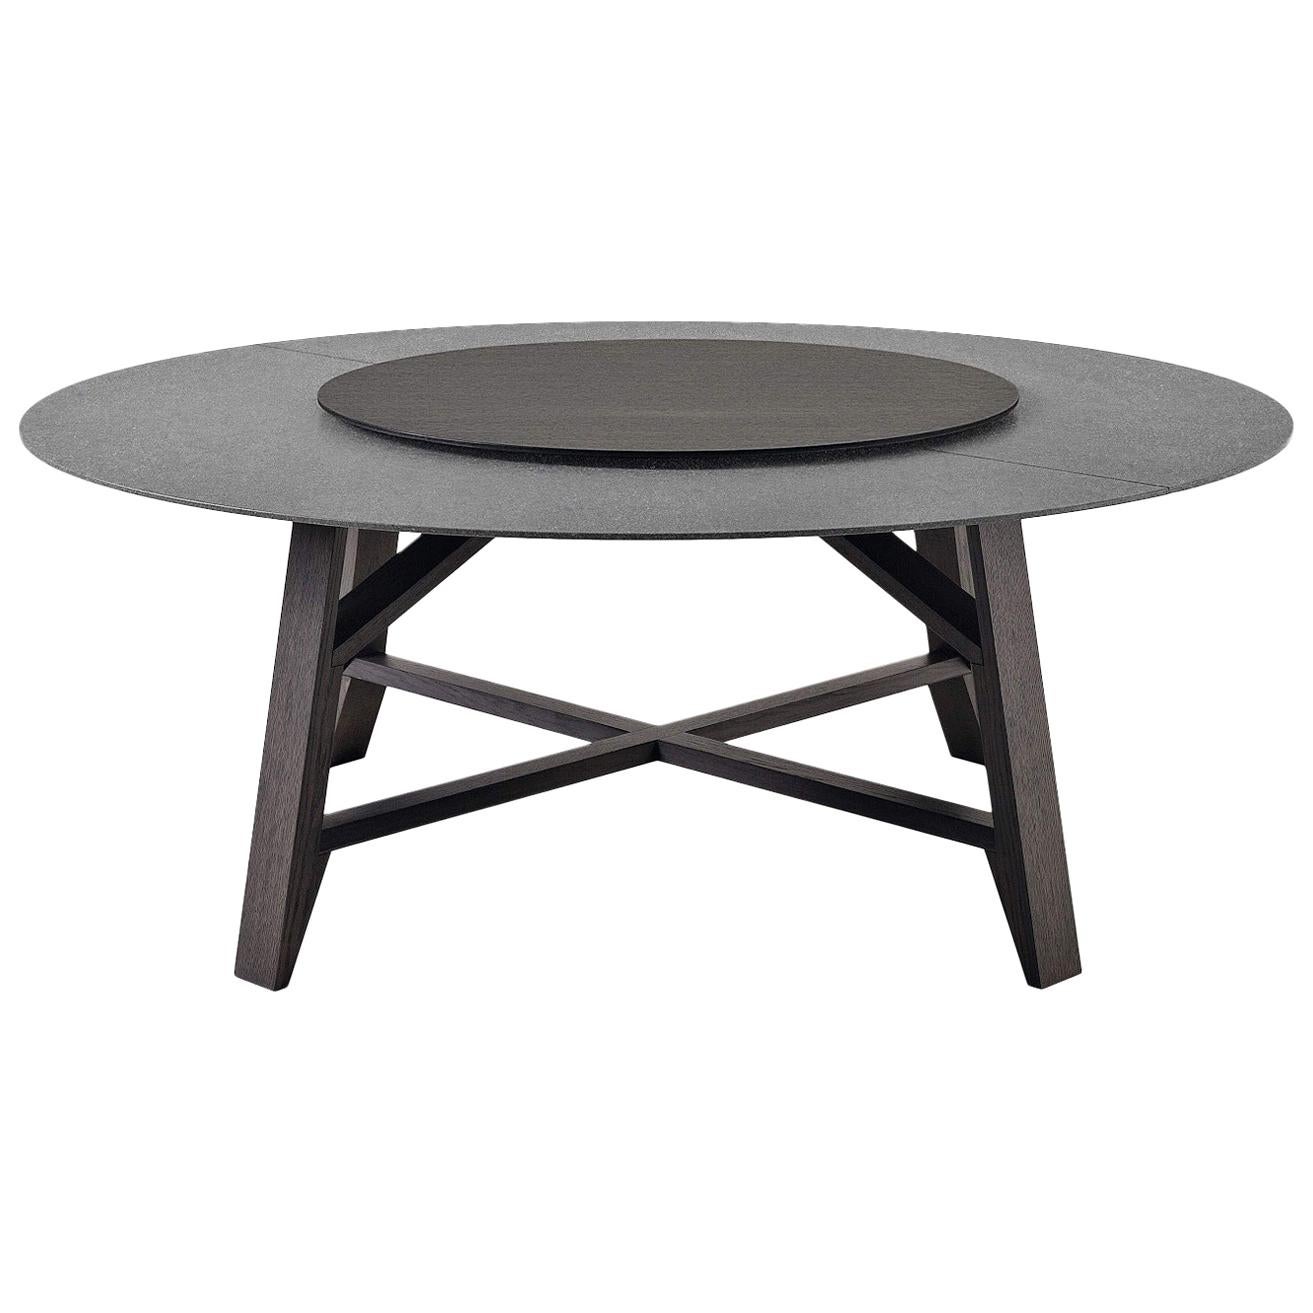 Controvento Table in Charcoal Gray with Revolving Tray by Busnelli For Sale